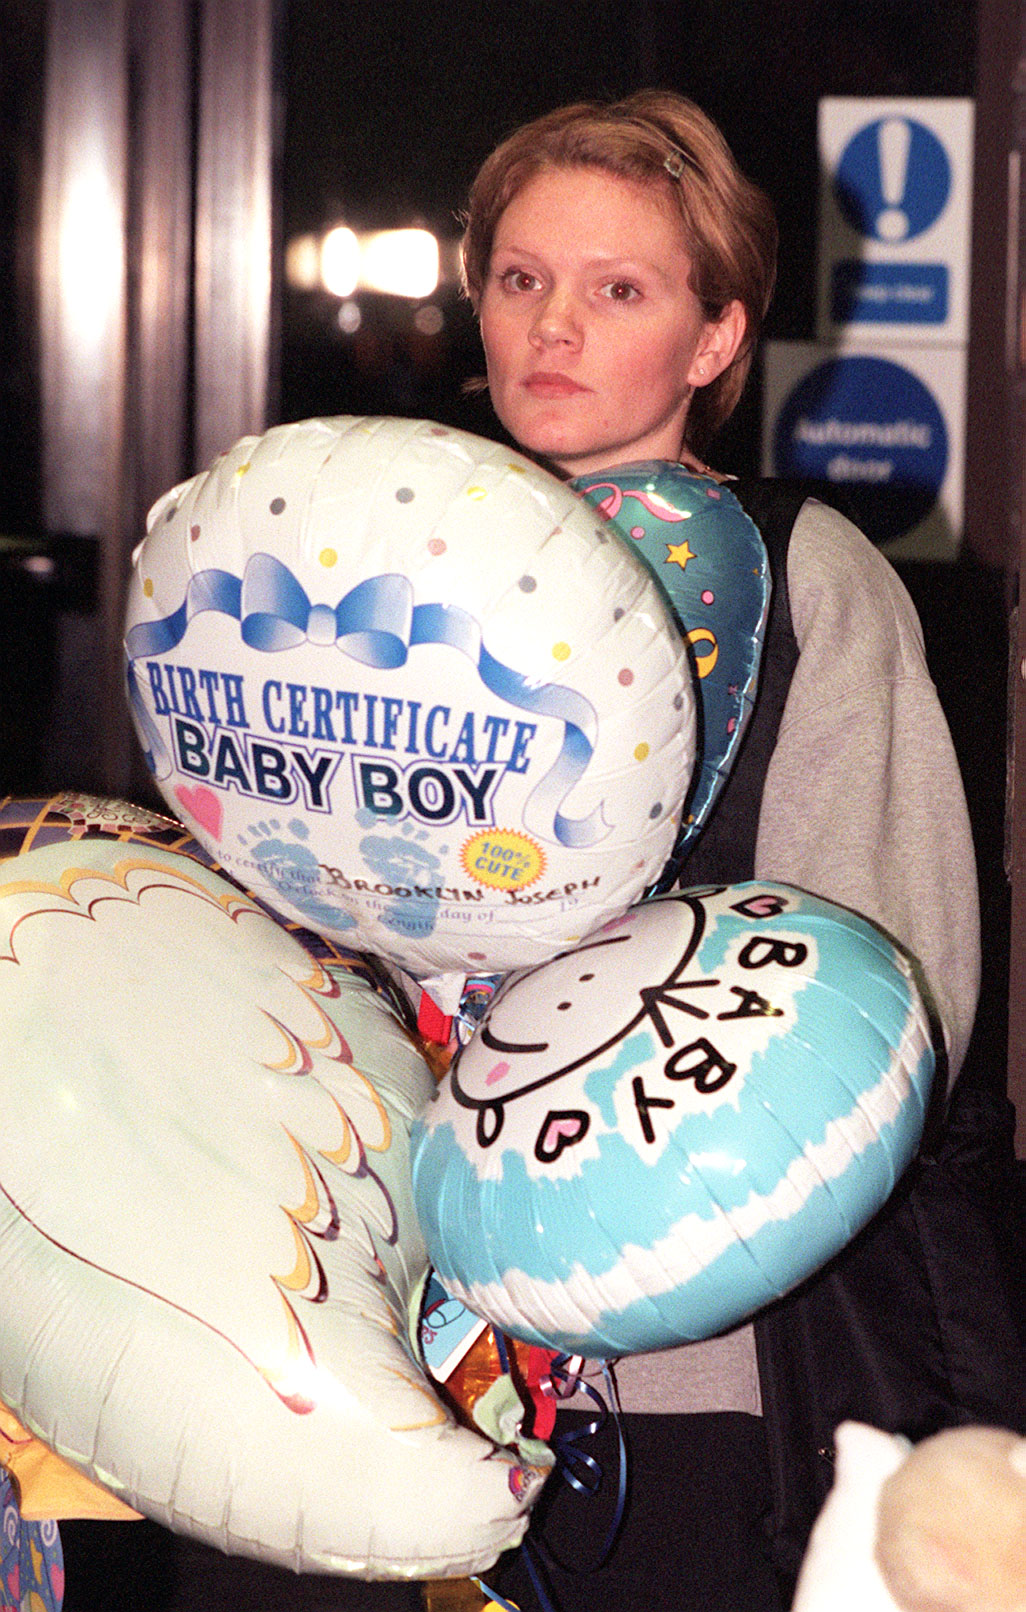 Louise Adams visiting her sister Victoria Beckham with her then-fiancé David Beckham, as the couple prepared to leave London's Portland Hospital with their newborn son, Brooklyn Joseph Beckham, on March 9, 1999 | Source: Getty Images